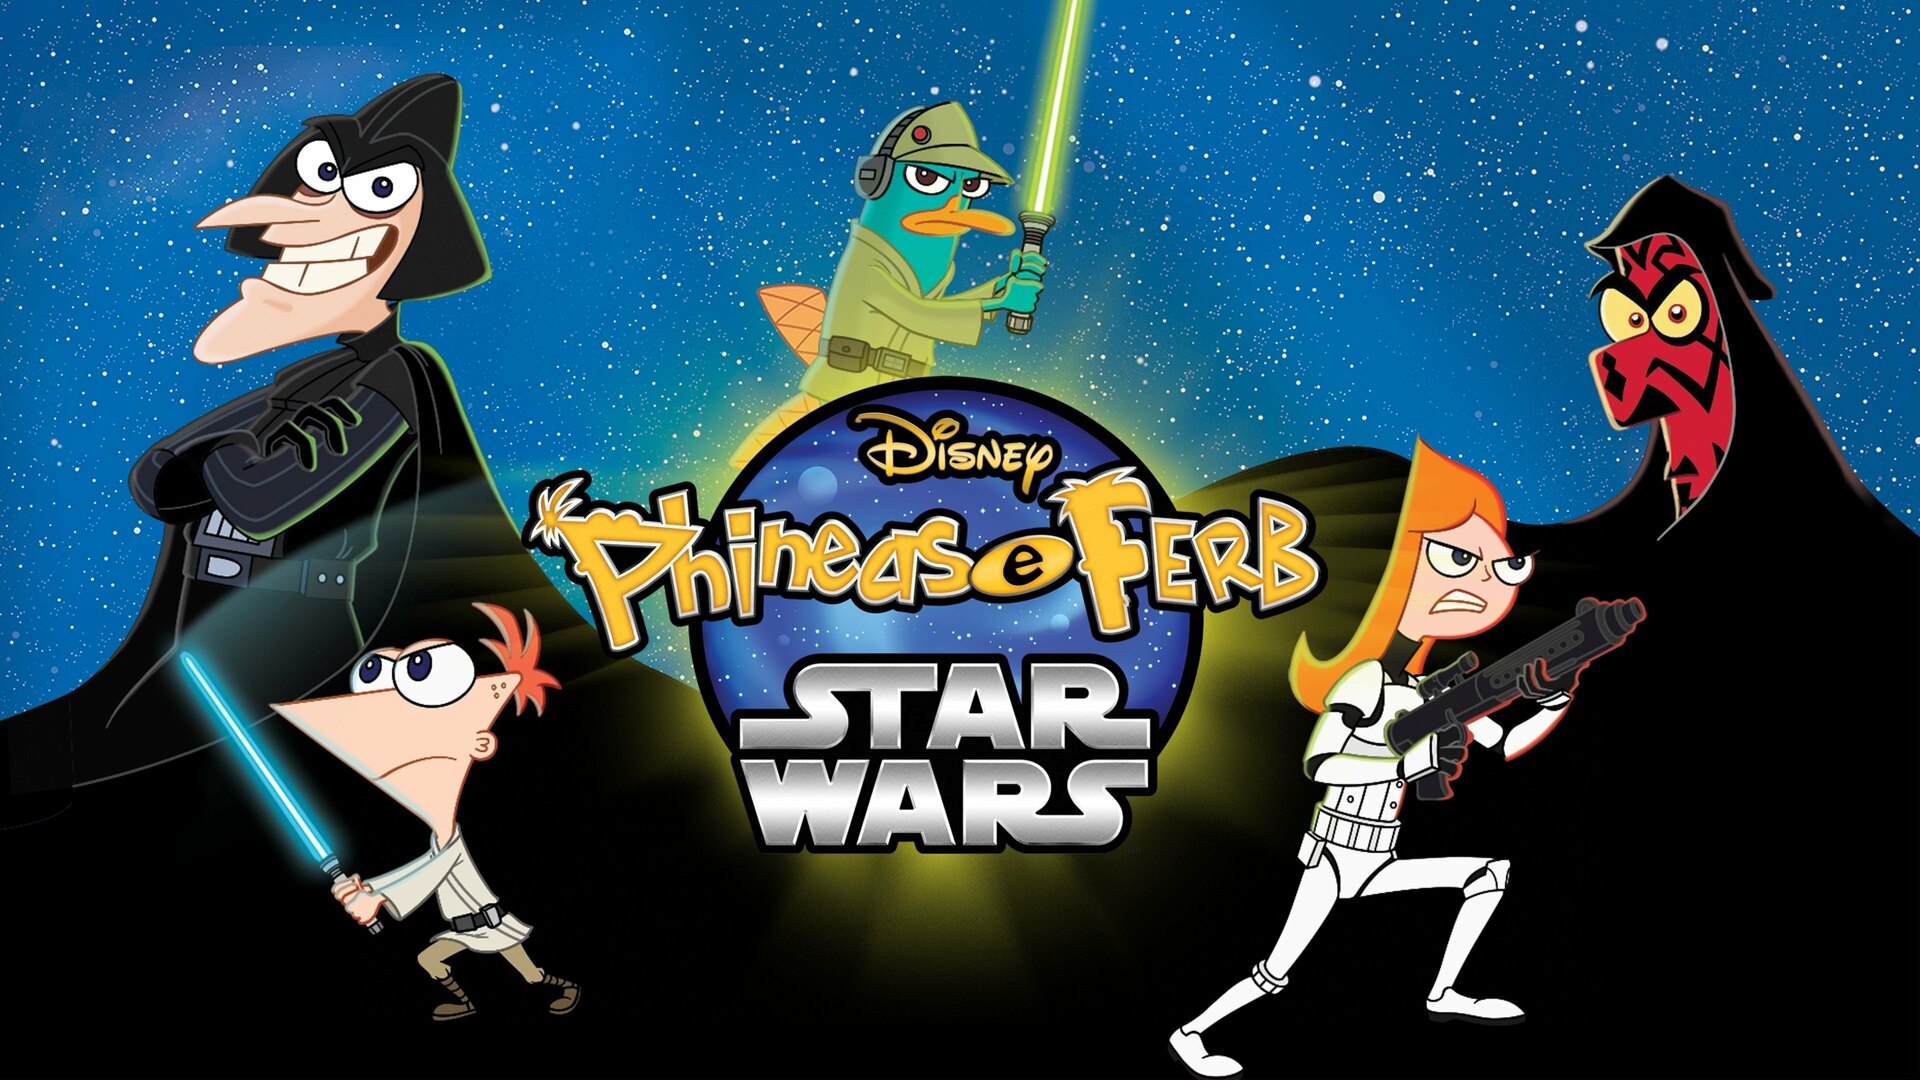 phineas-and-ferb-star-wars-2014